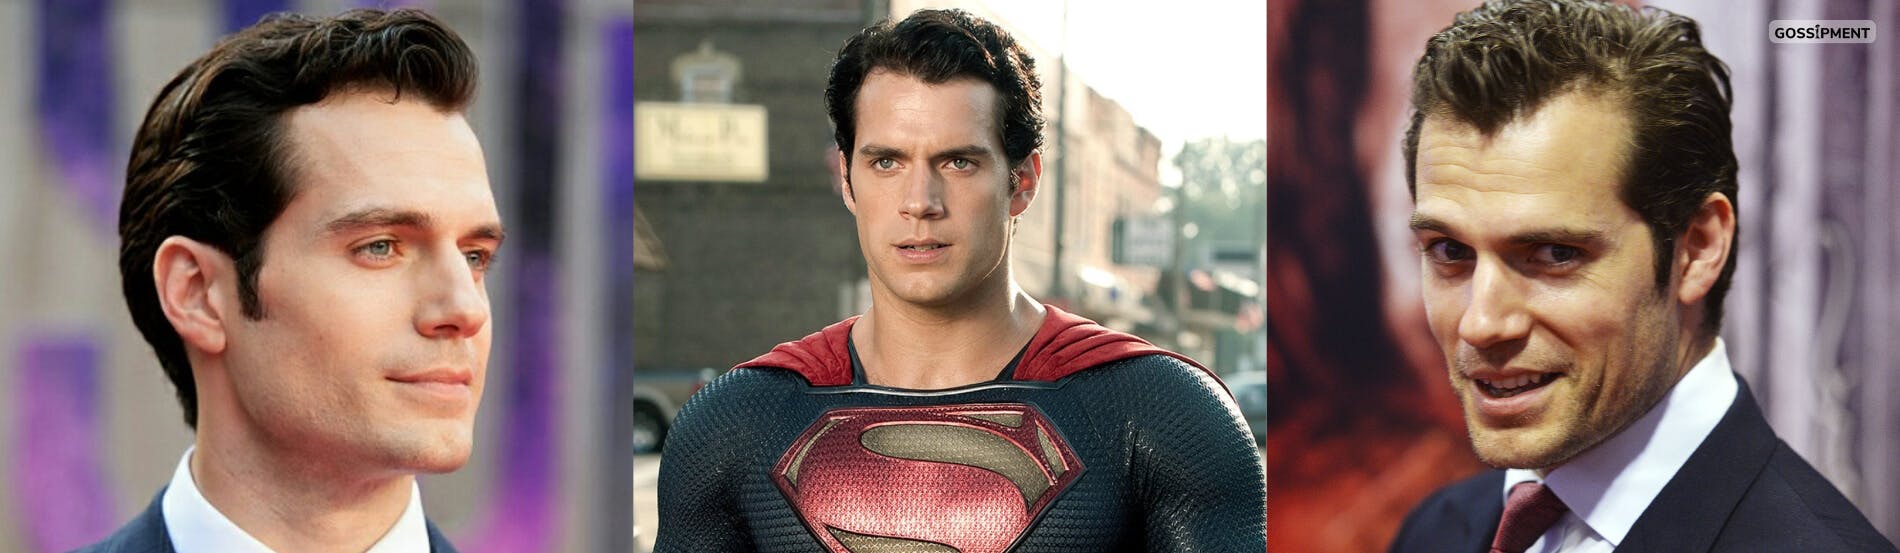 Cover Image for Henry Cavill In Talks To Return As Superman In Man Of Steel 2 – McQuarrie Possibly On Board For The Creative Team?